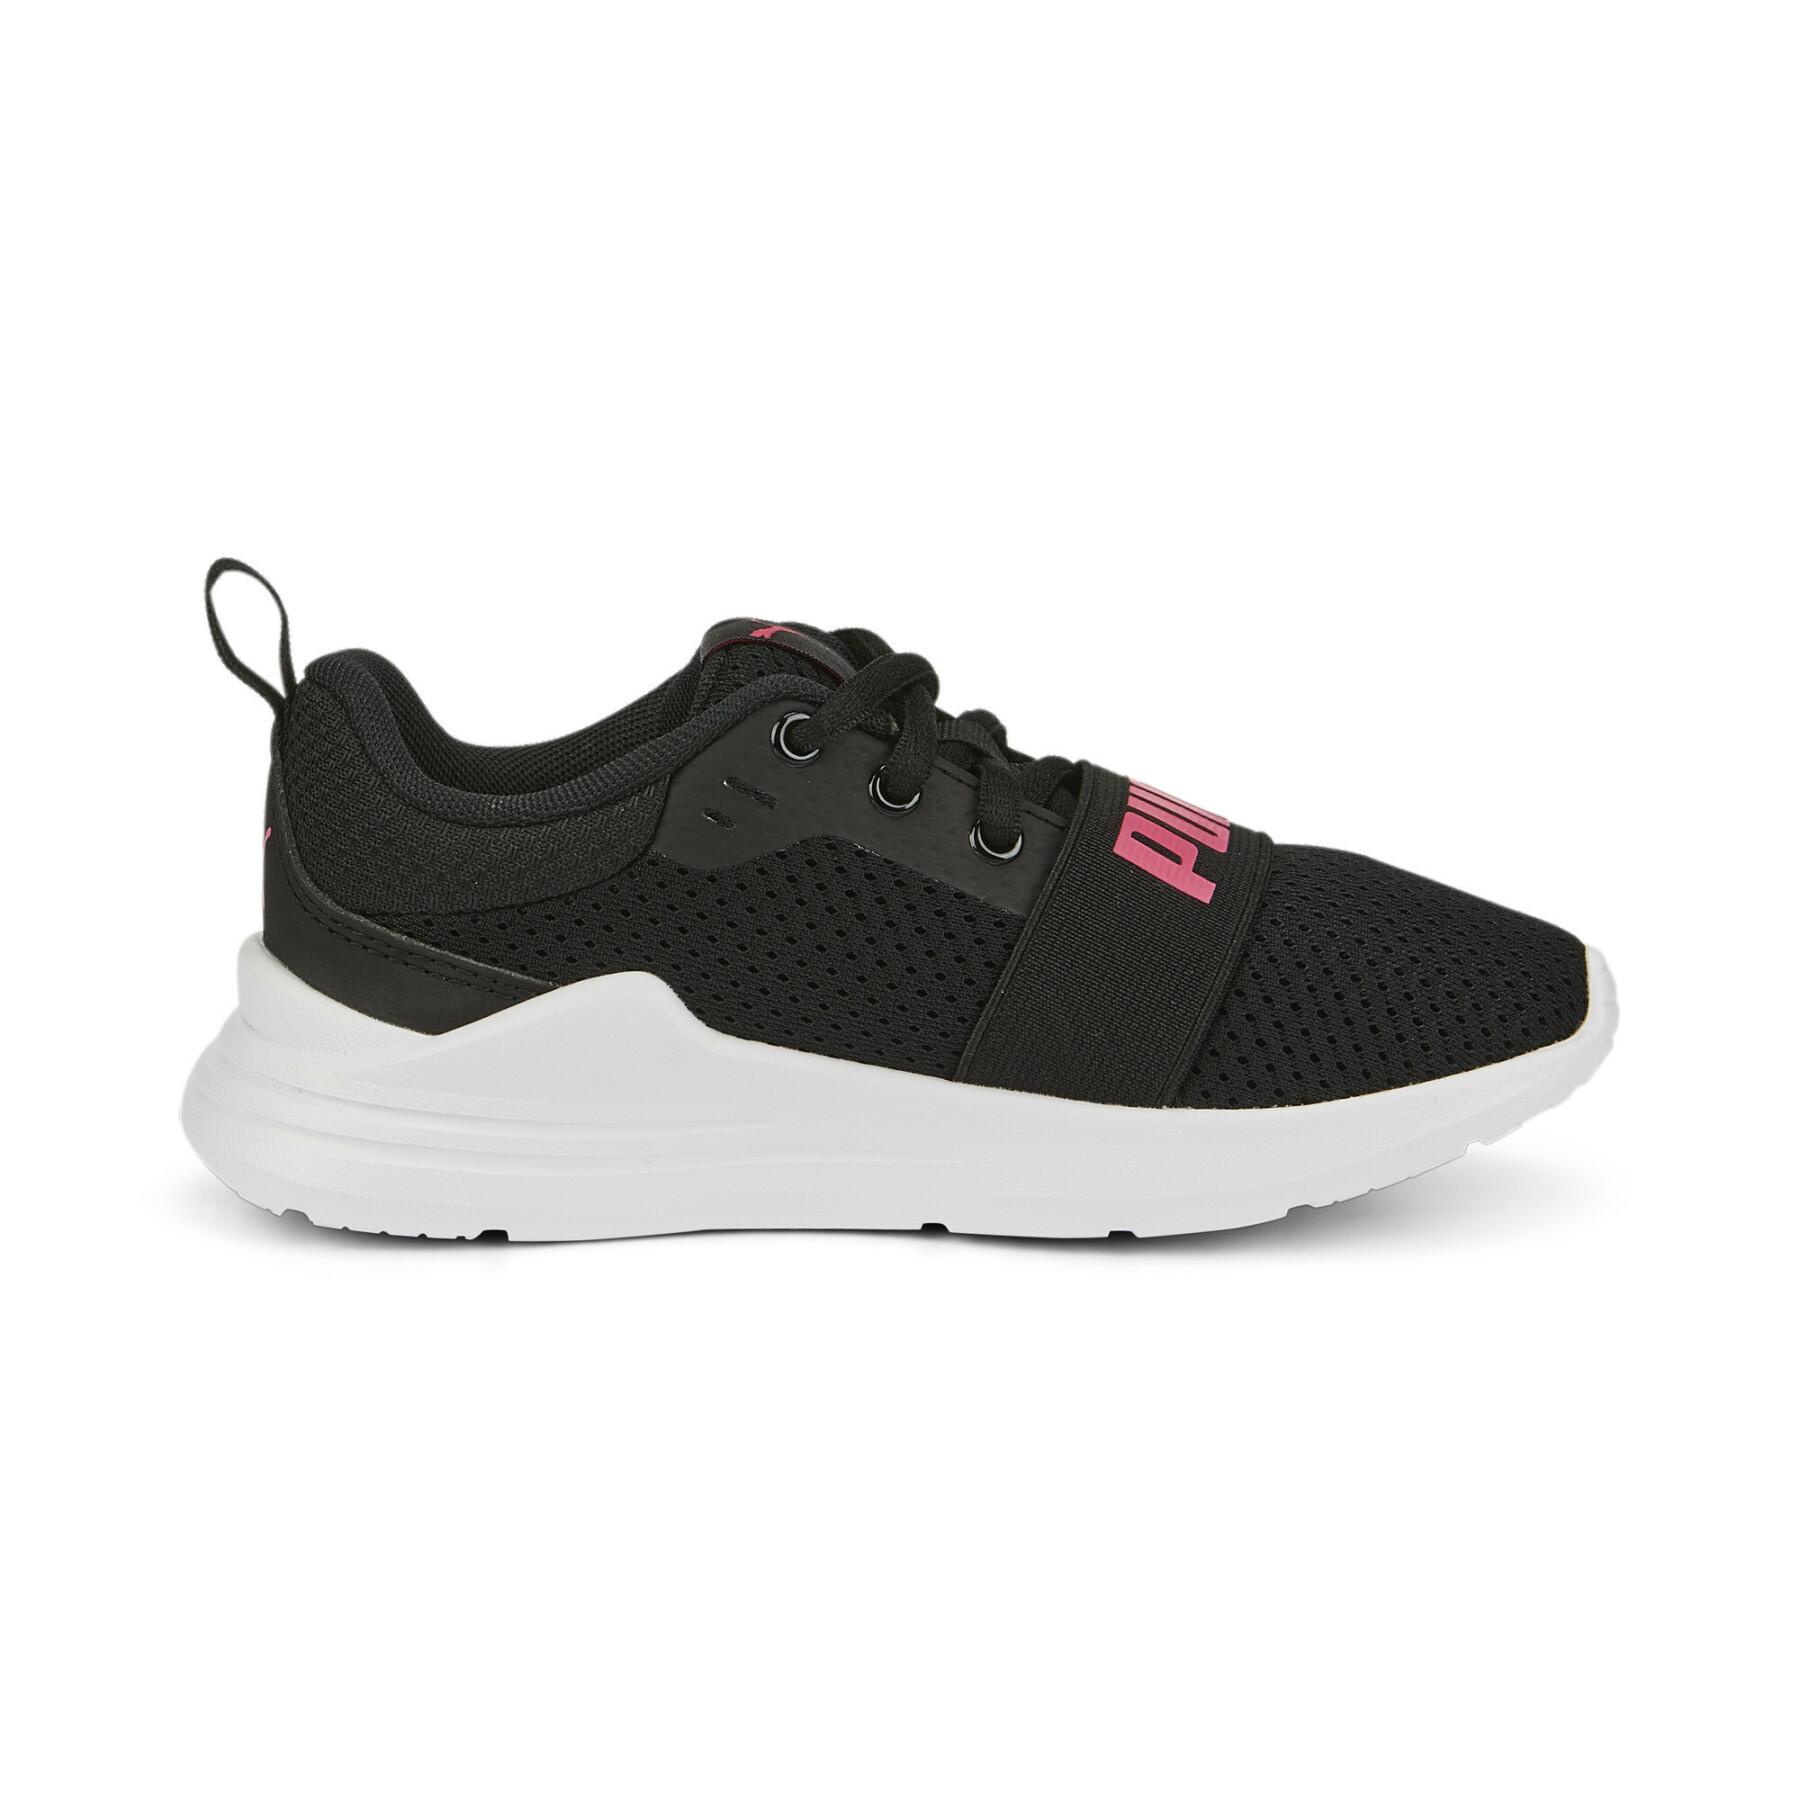 Children's shoes Puma Wired Run PS